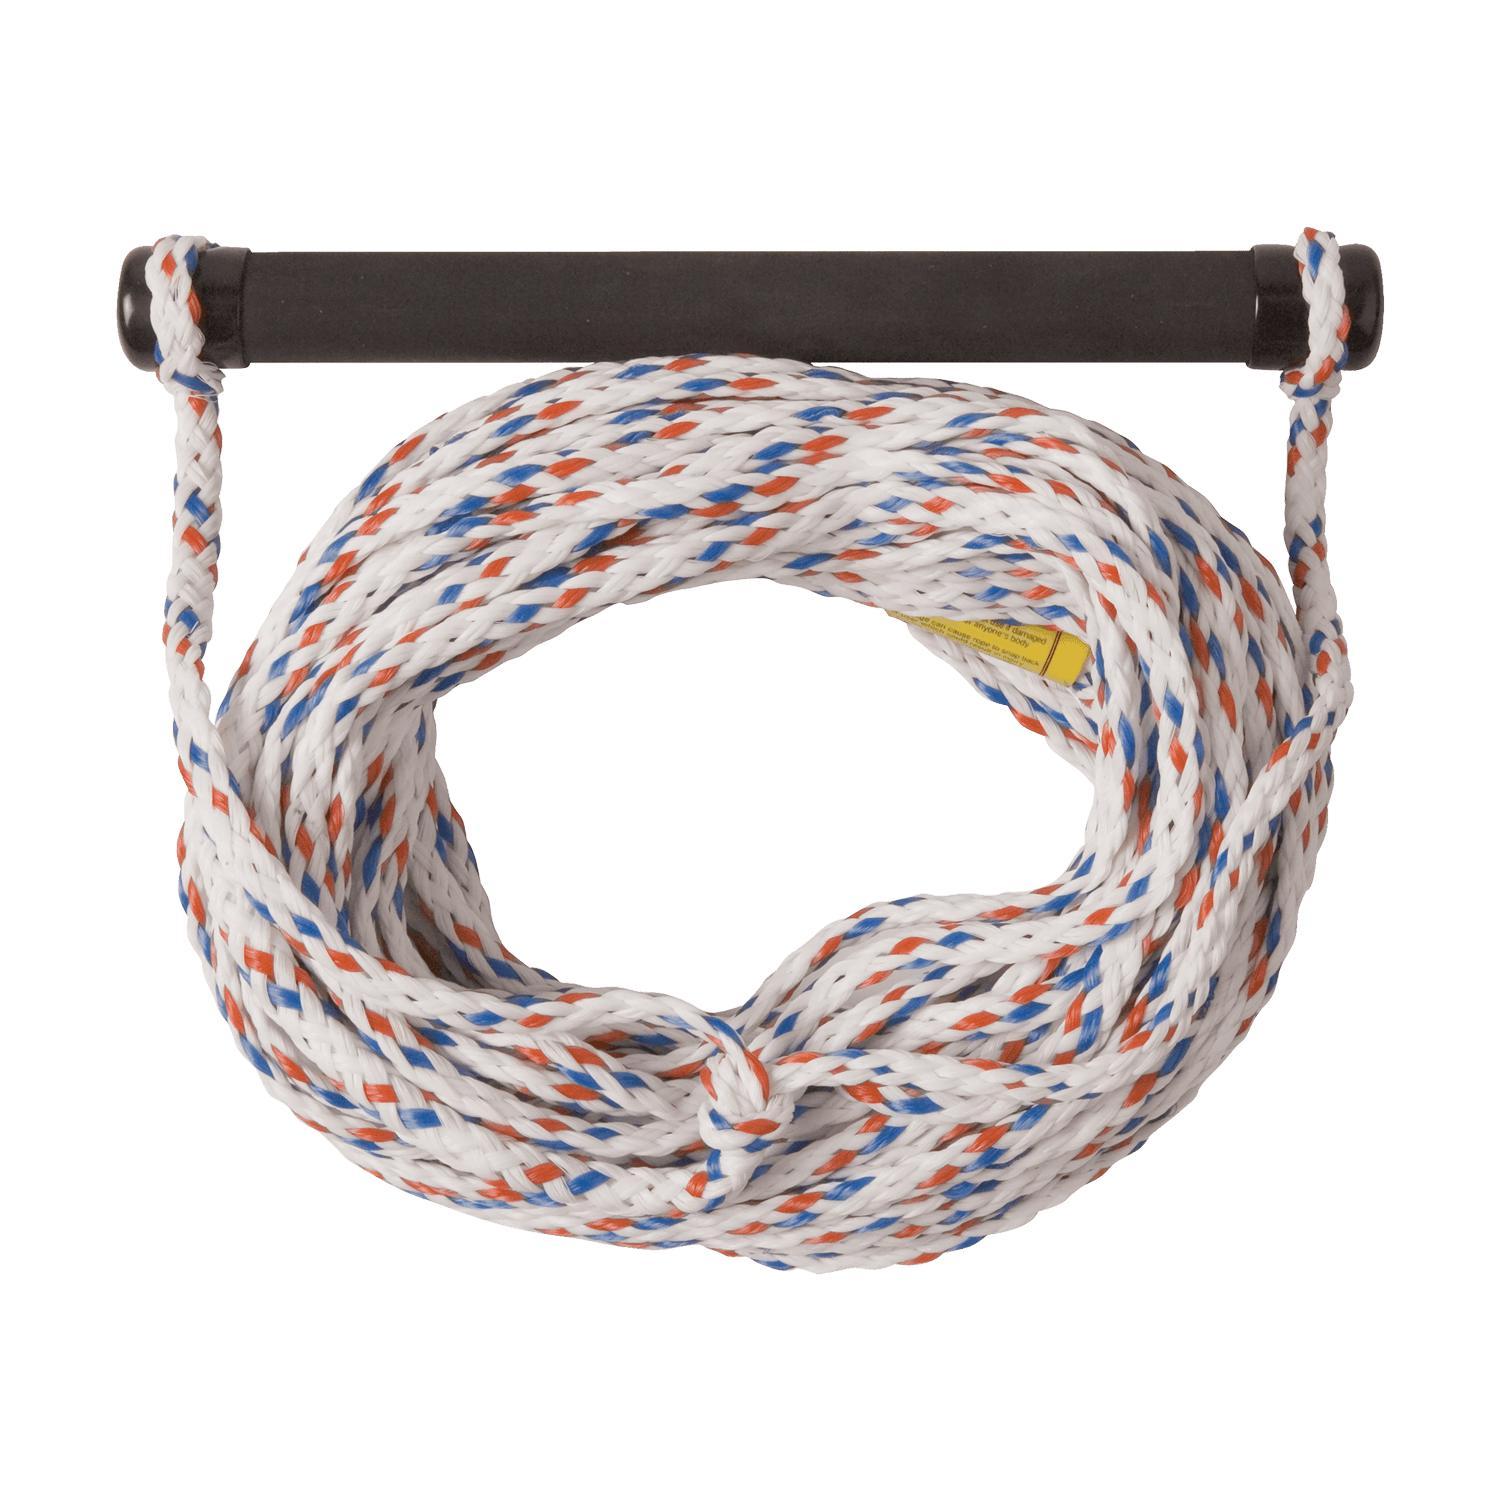  16 75ft 12 ` Universal Water Sports Rope